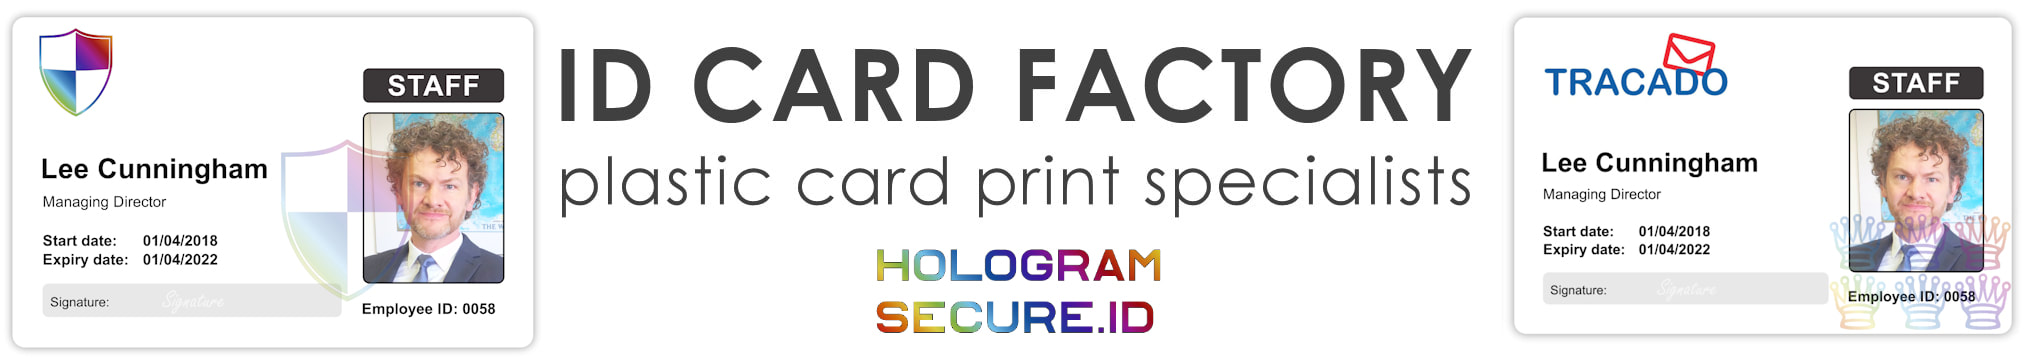 Merseyside holographic ID cards | examples of staff photo ID cards | samples of employee Identity card printing | Workers ID cards printed with hologram